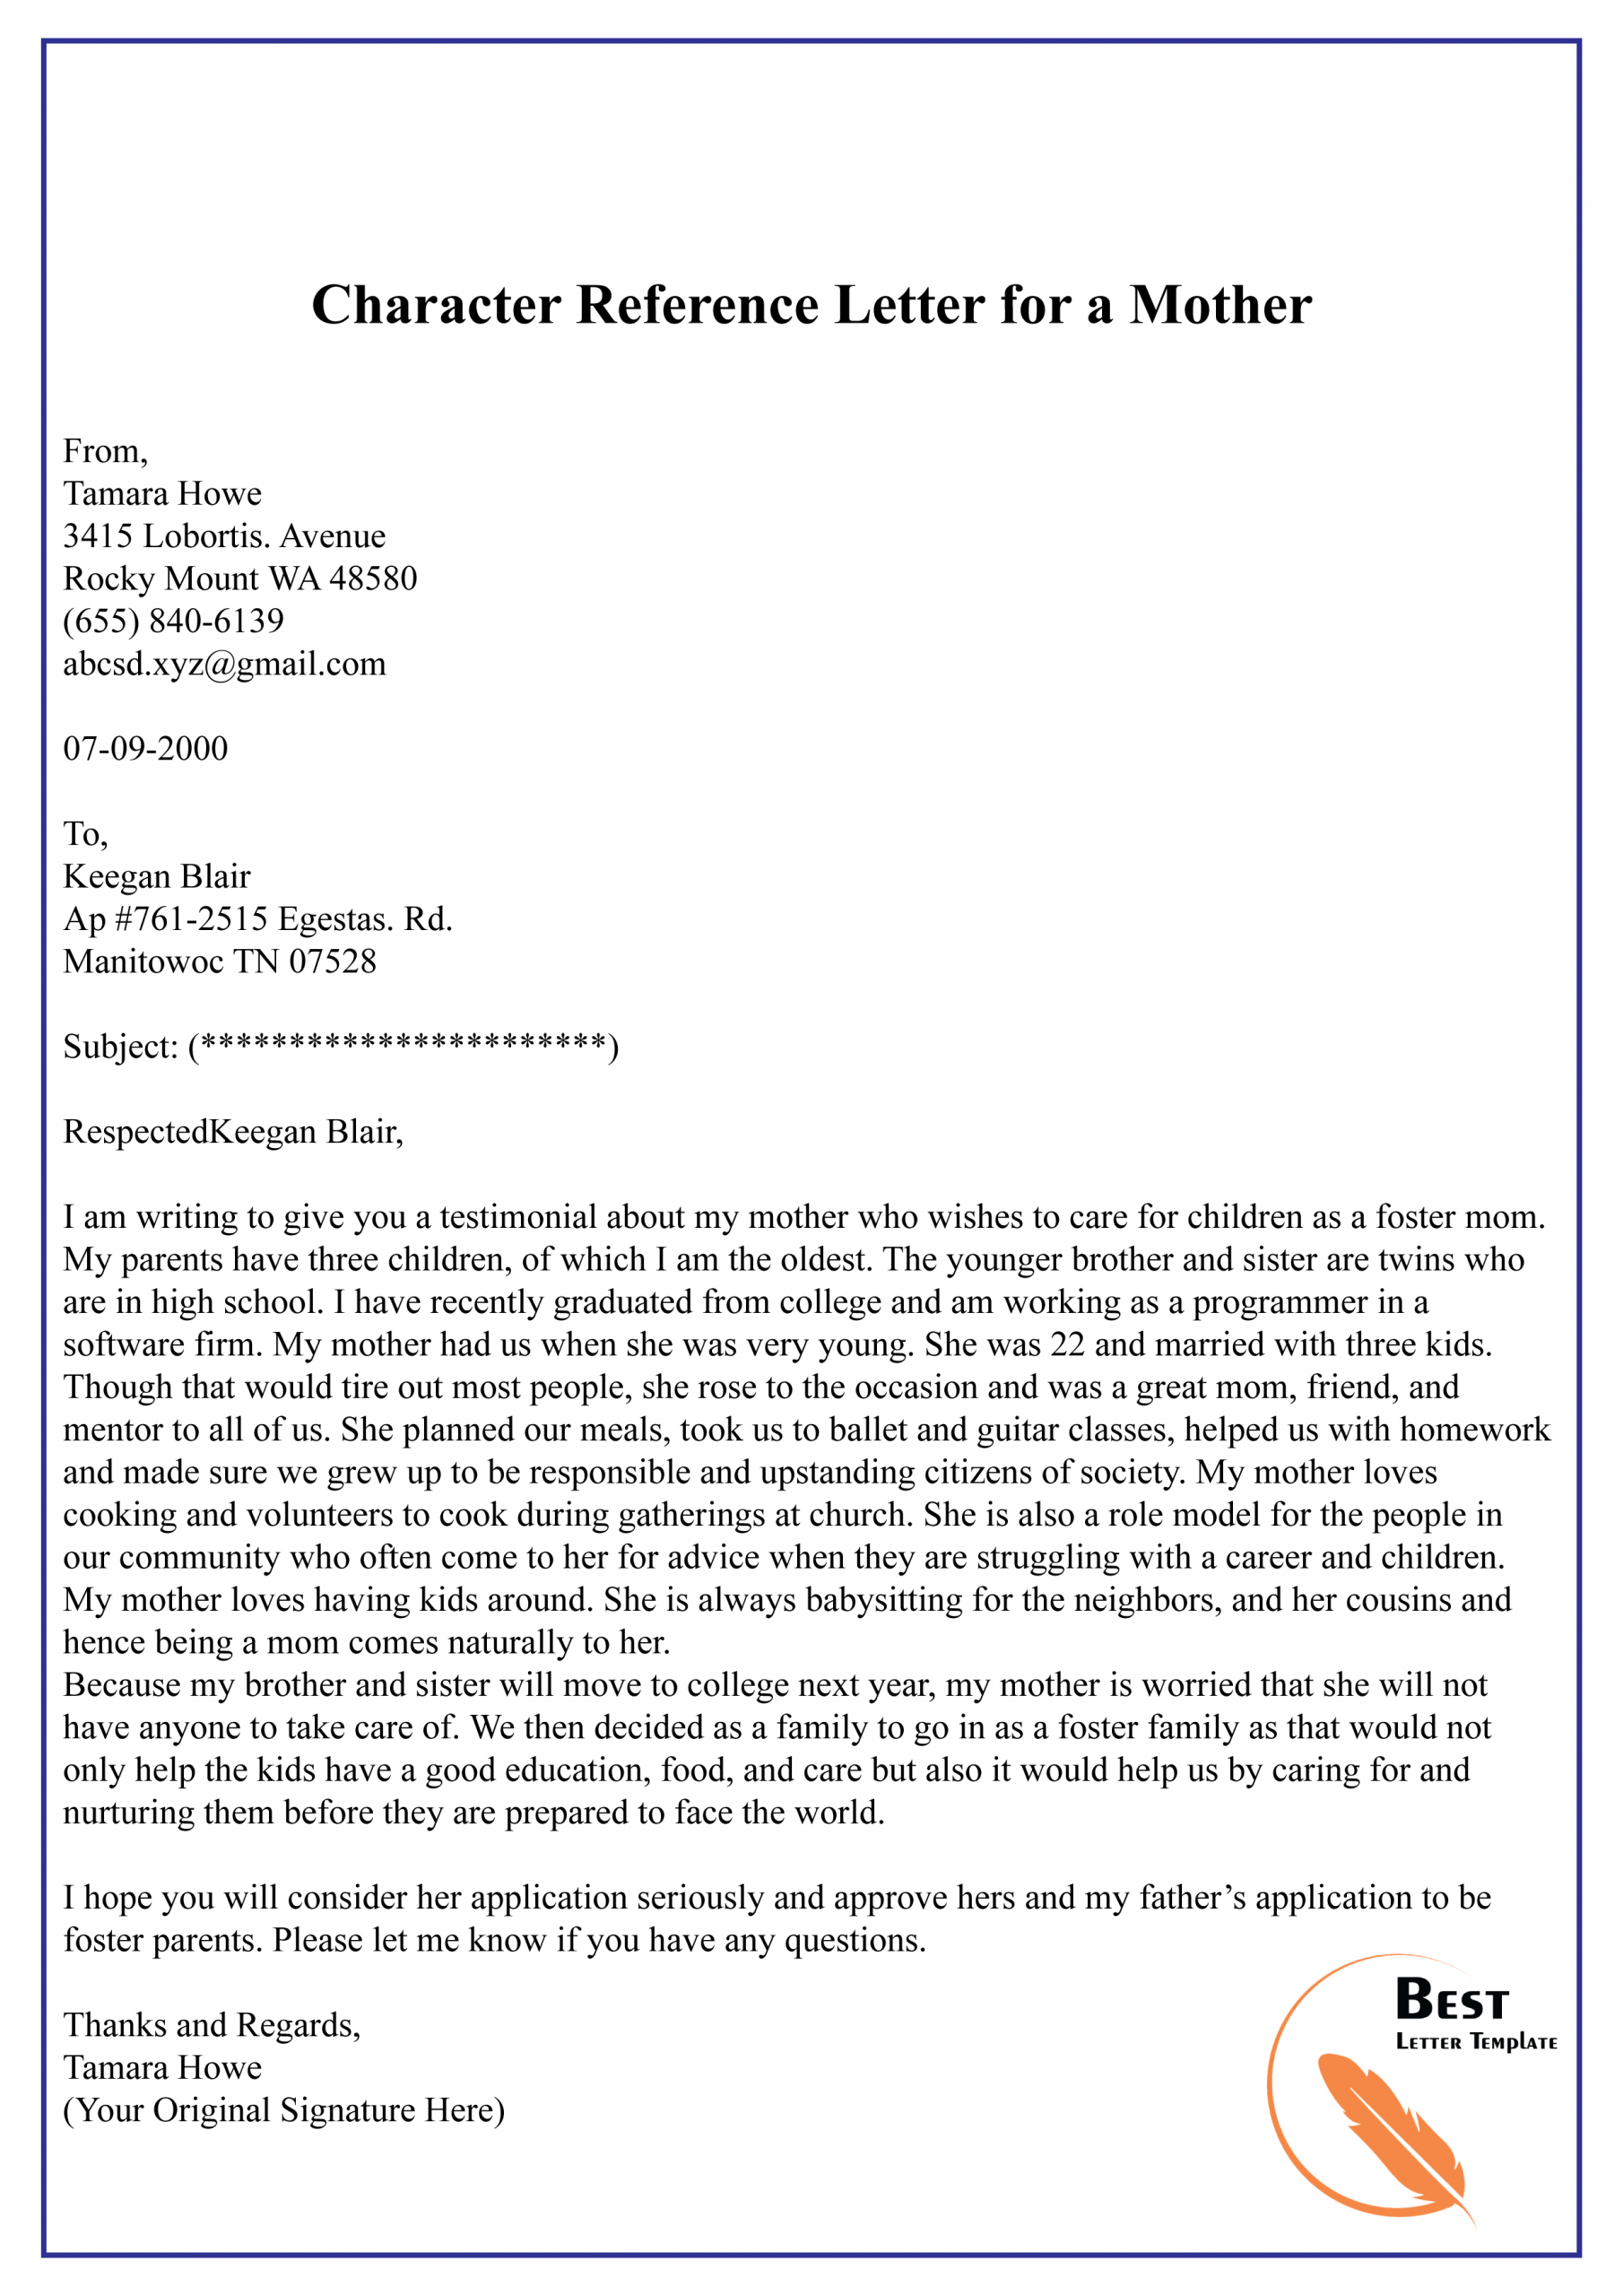 Character Reference Letter For A Mother 01 Best Letter with sizing 2480 X 3508